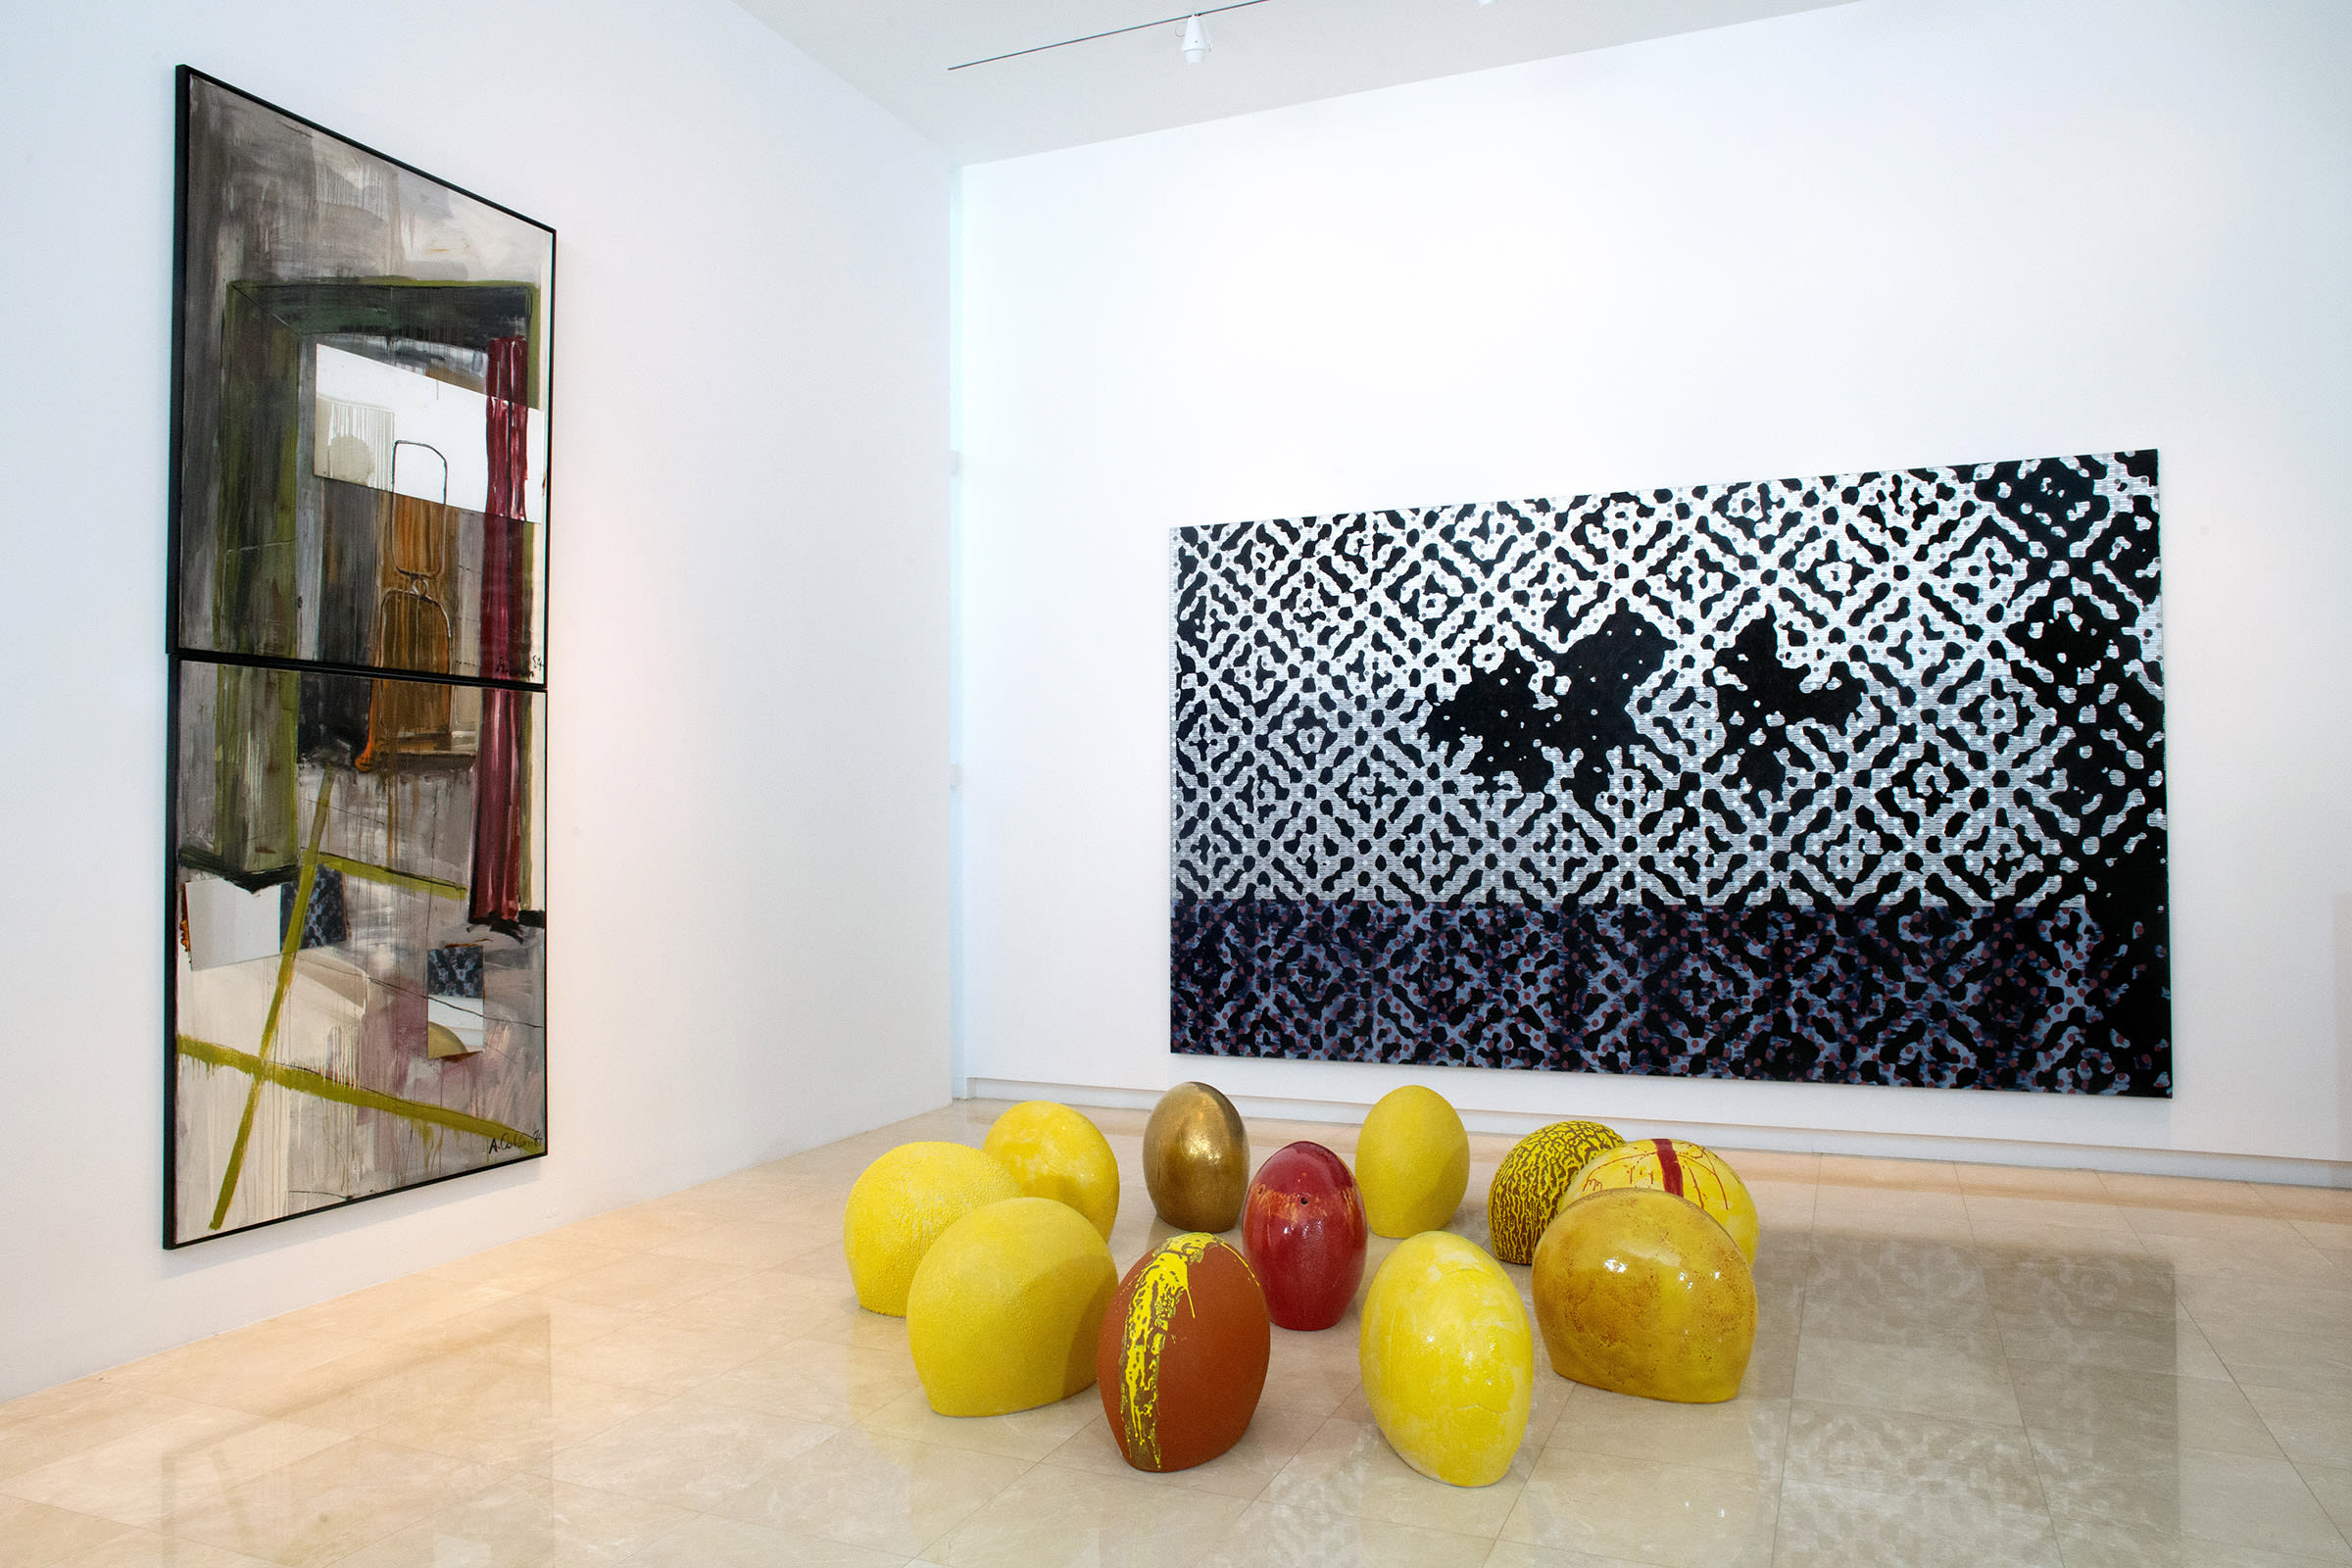 Installation view of Thomas Schutte, You are my Sun, 1998. Also featured: Albert Oehlen, KNZ and NZ, 1984 and Sigmar Polke, I Live in My Own World, but It&#039;s Ok, They Know Me Here, 2002. Courtesy of the de la Cruz Collection.